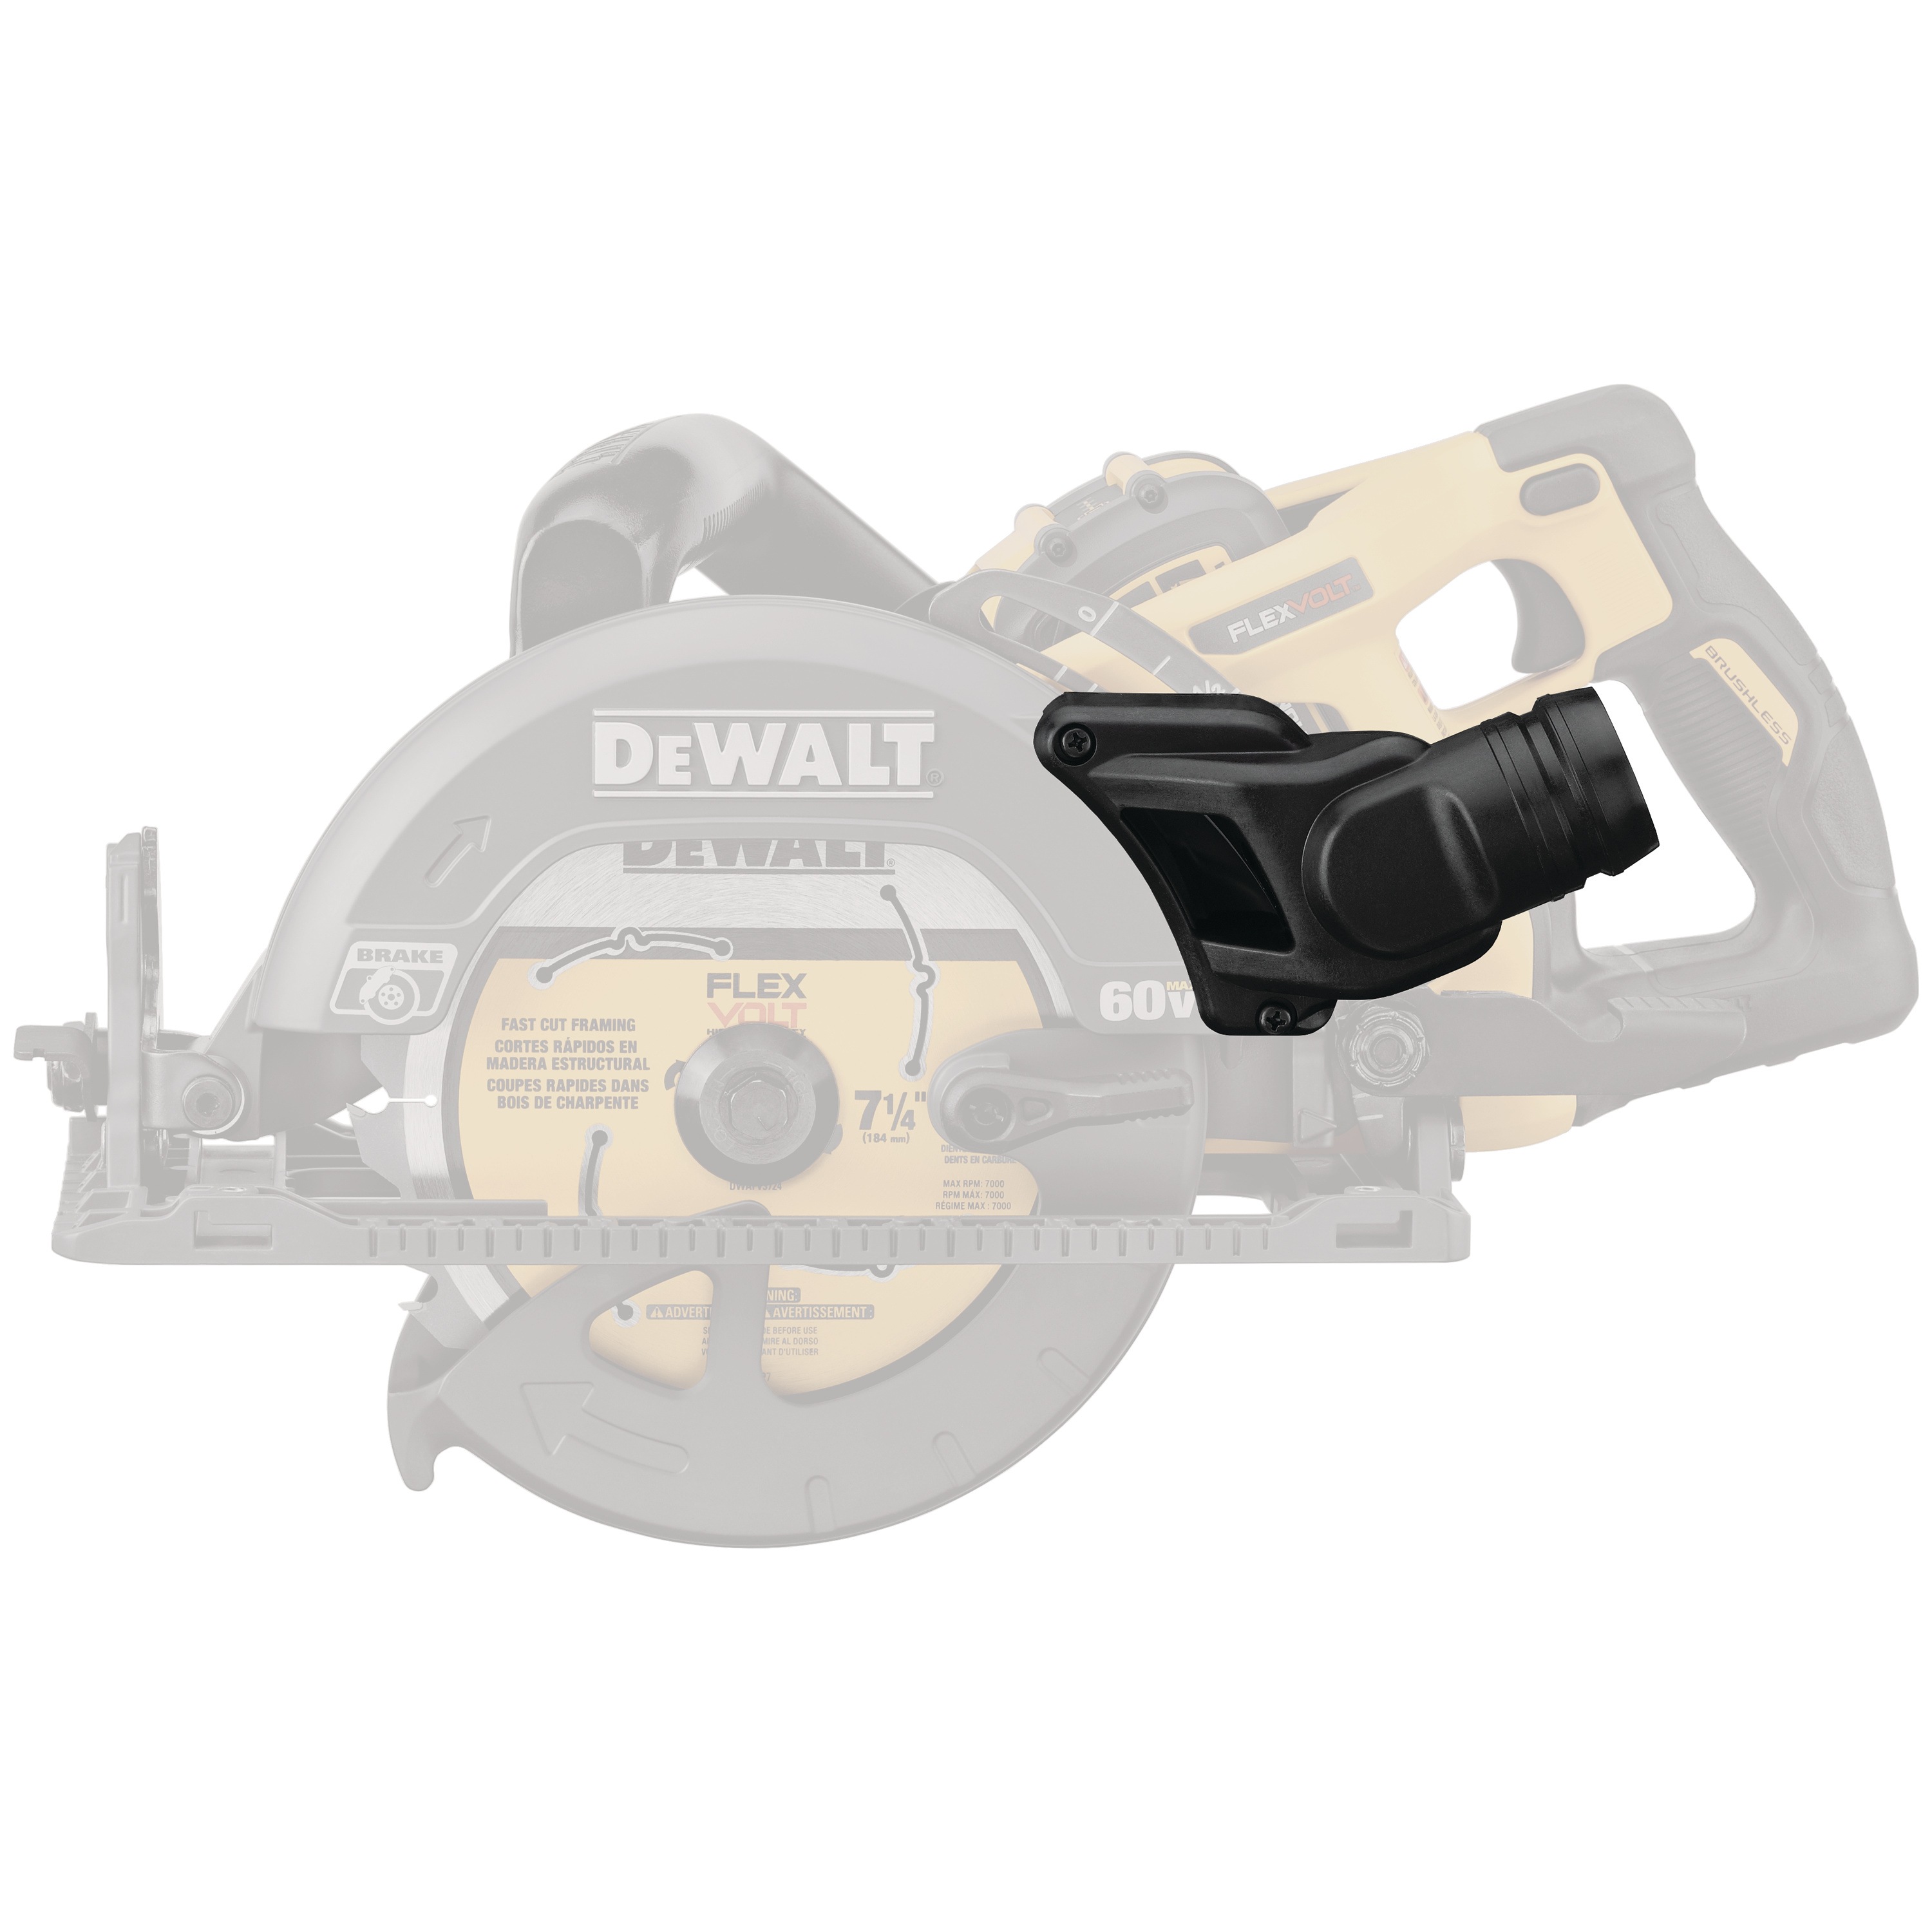 DEWALT dust port connector to be used with Dewalt Worm drive style saw.